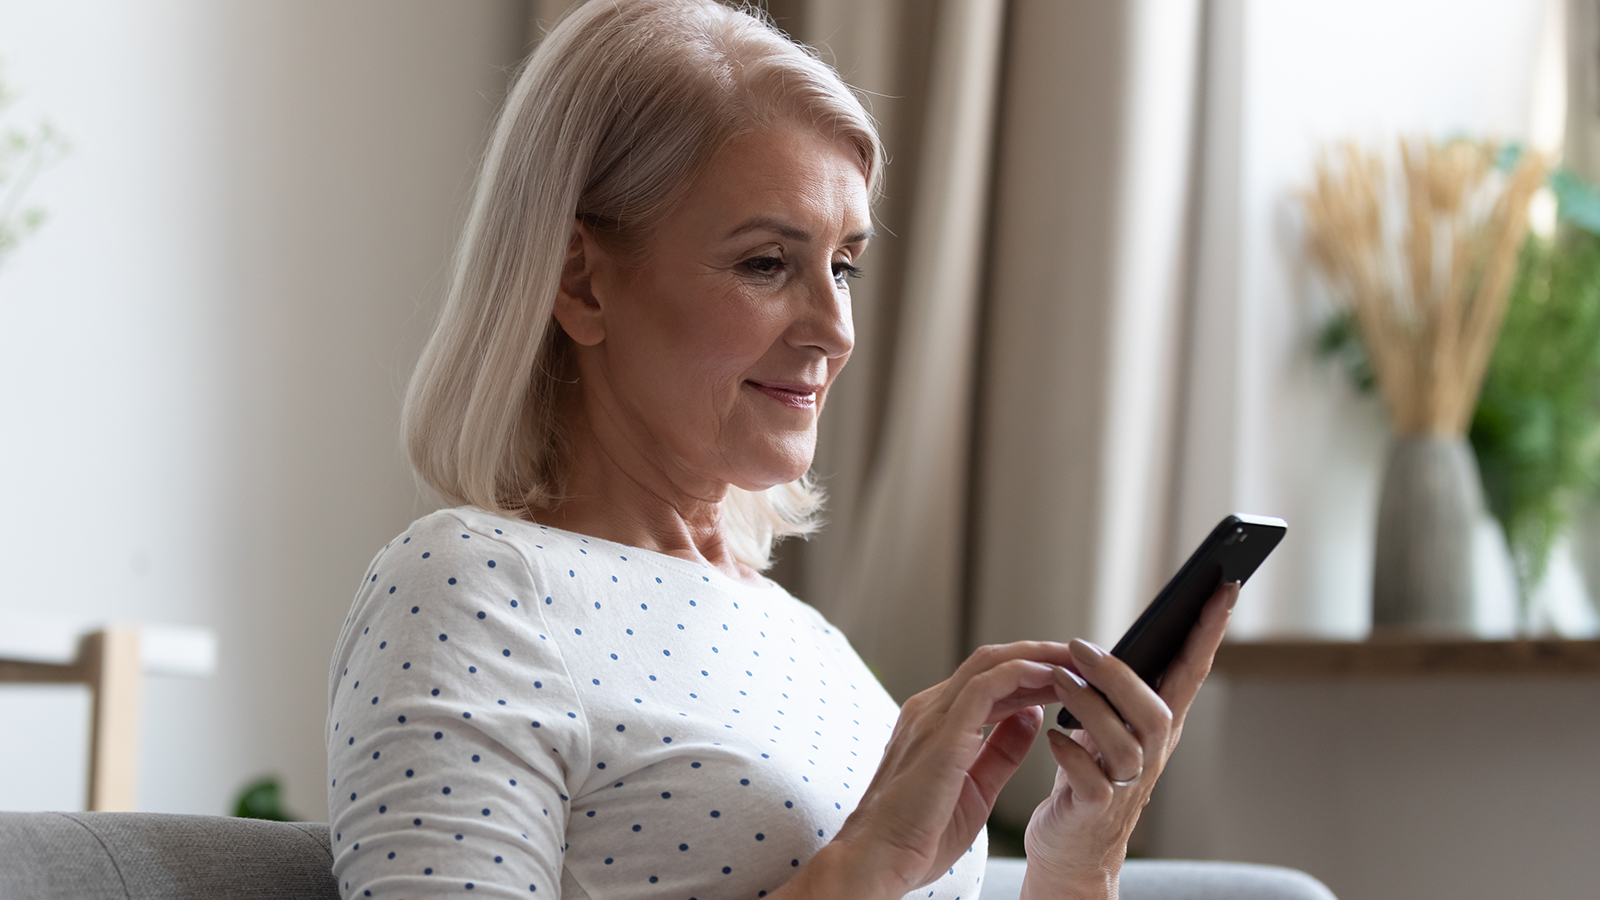 Happy middle aged mature woman enjoying using mobile apps texting typing messages sit on sofa, smiling old adult lady holding smartphone looking at cellphone screen browsing social media at home